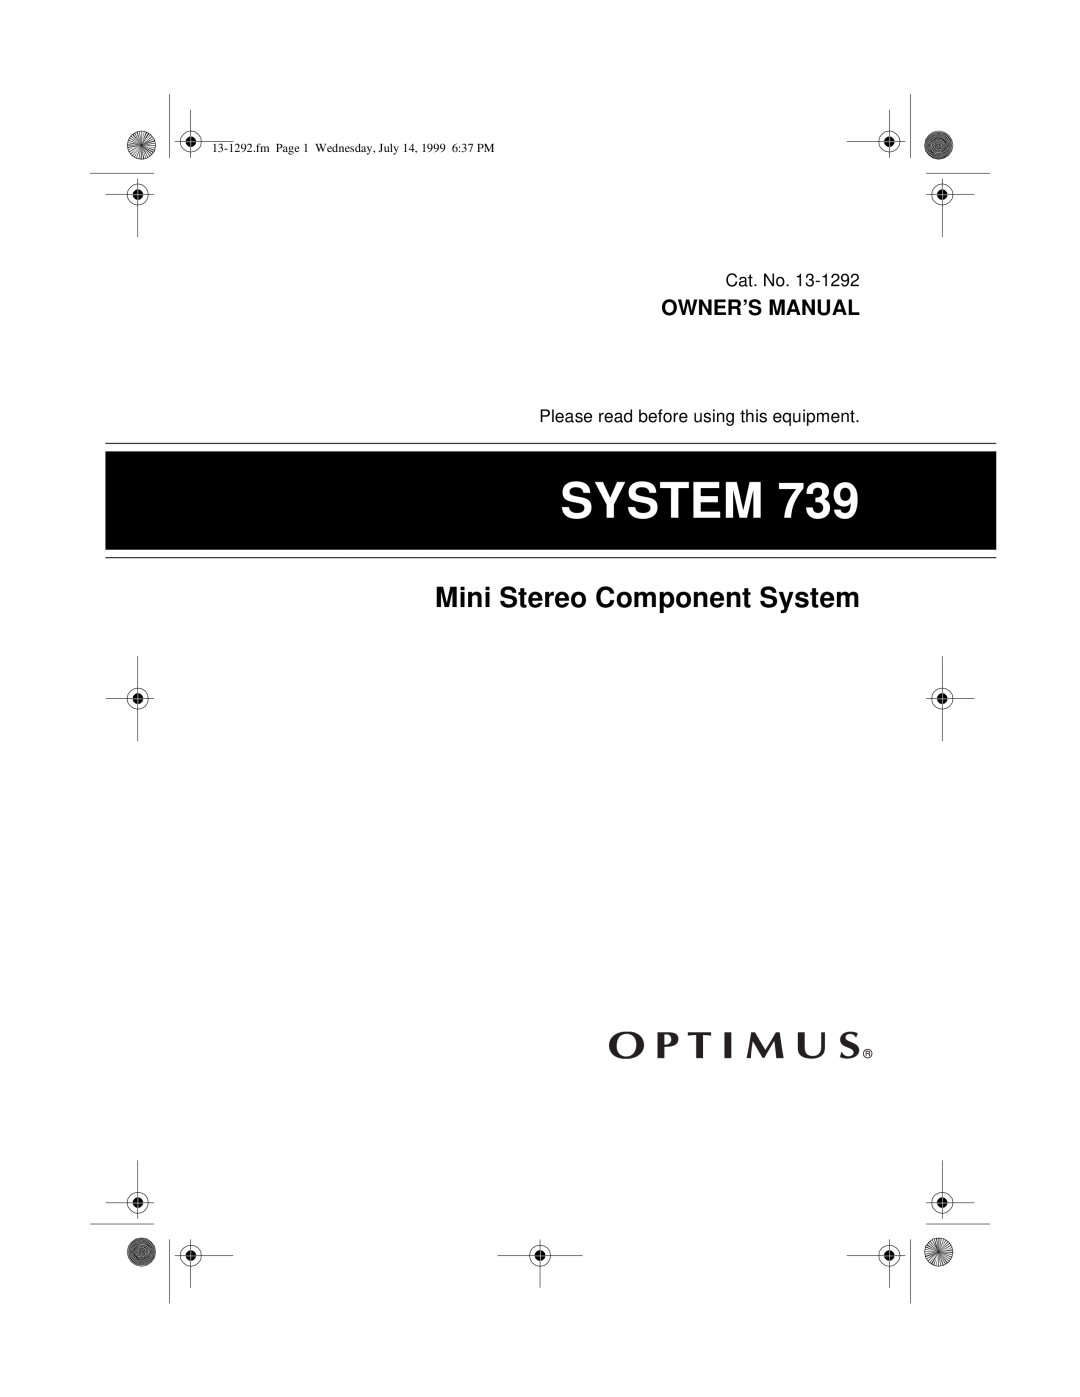 Optimus 739 owner manual Mini Stereo Component System, Owner’S Manual, fmPage 1 Wednesday, July 14, 1999 6:37 PM 